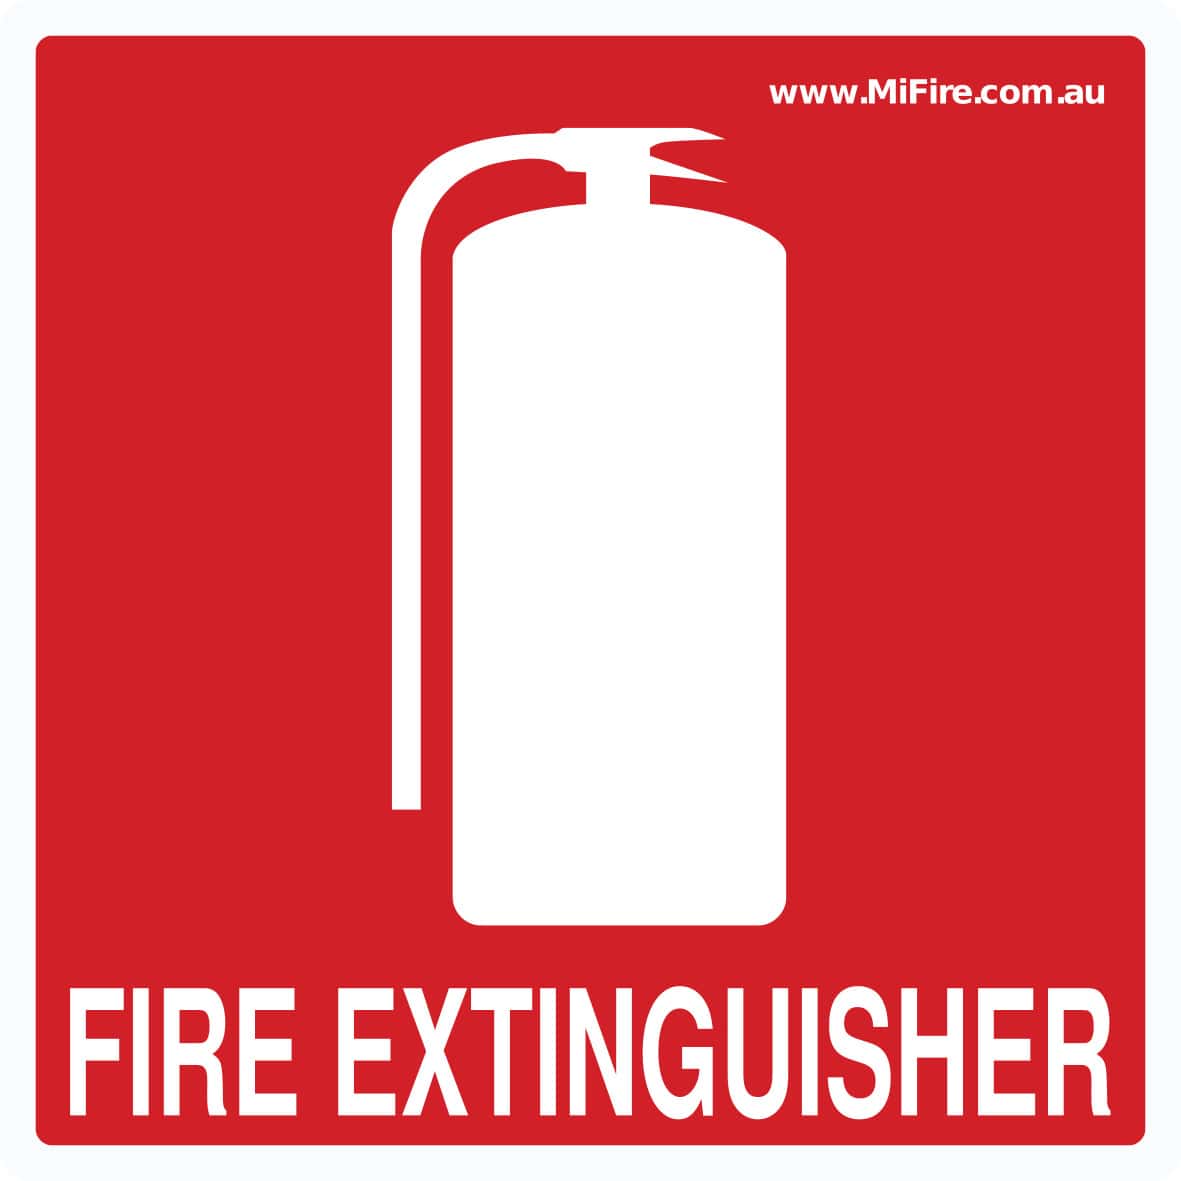 MiFire Fire Extinguisher Sign 100mm x 100mm